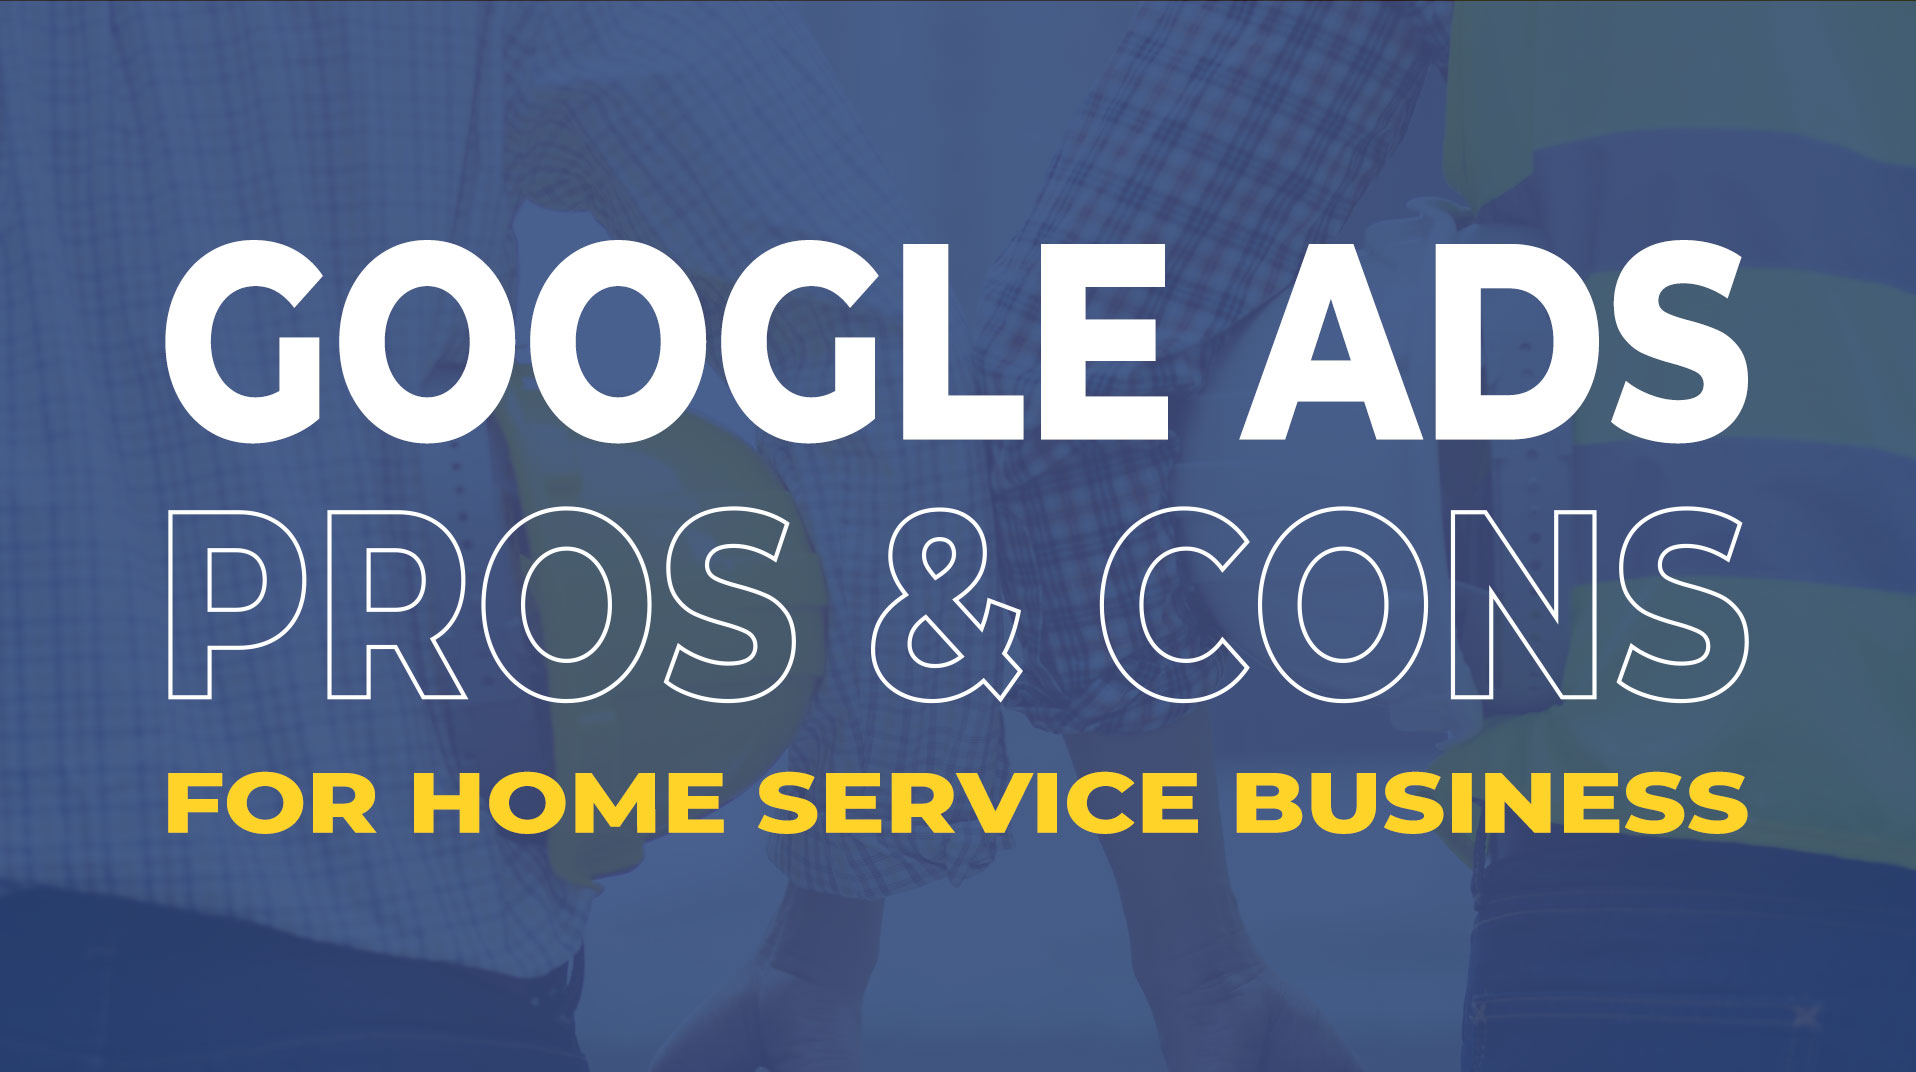 Pros and Cons of Google Ads for Home Service Businesses